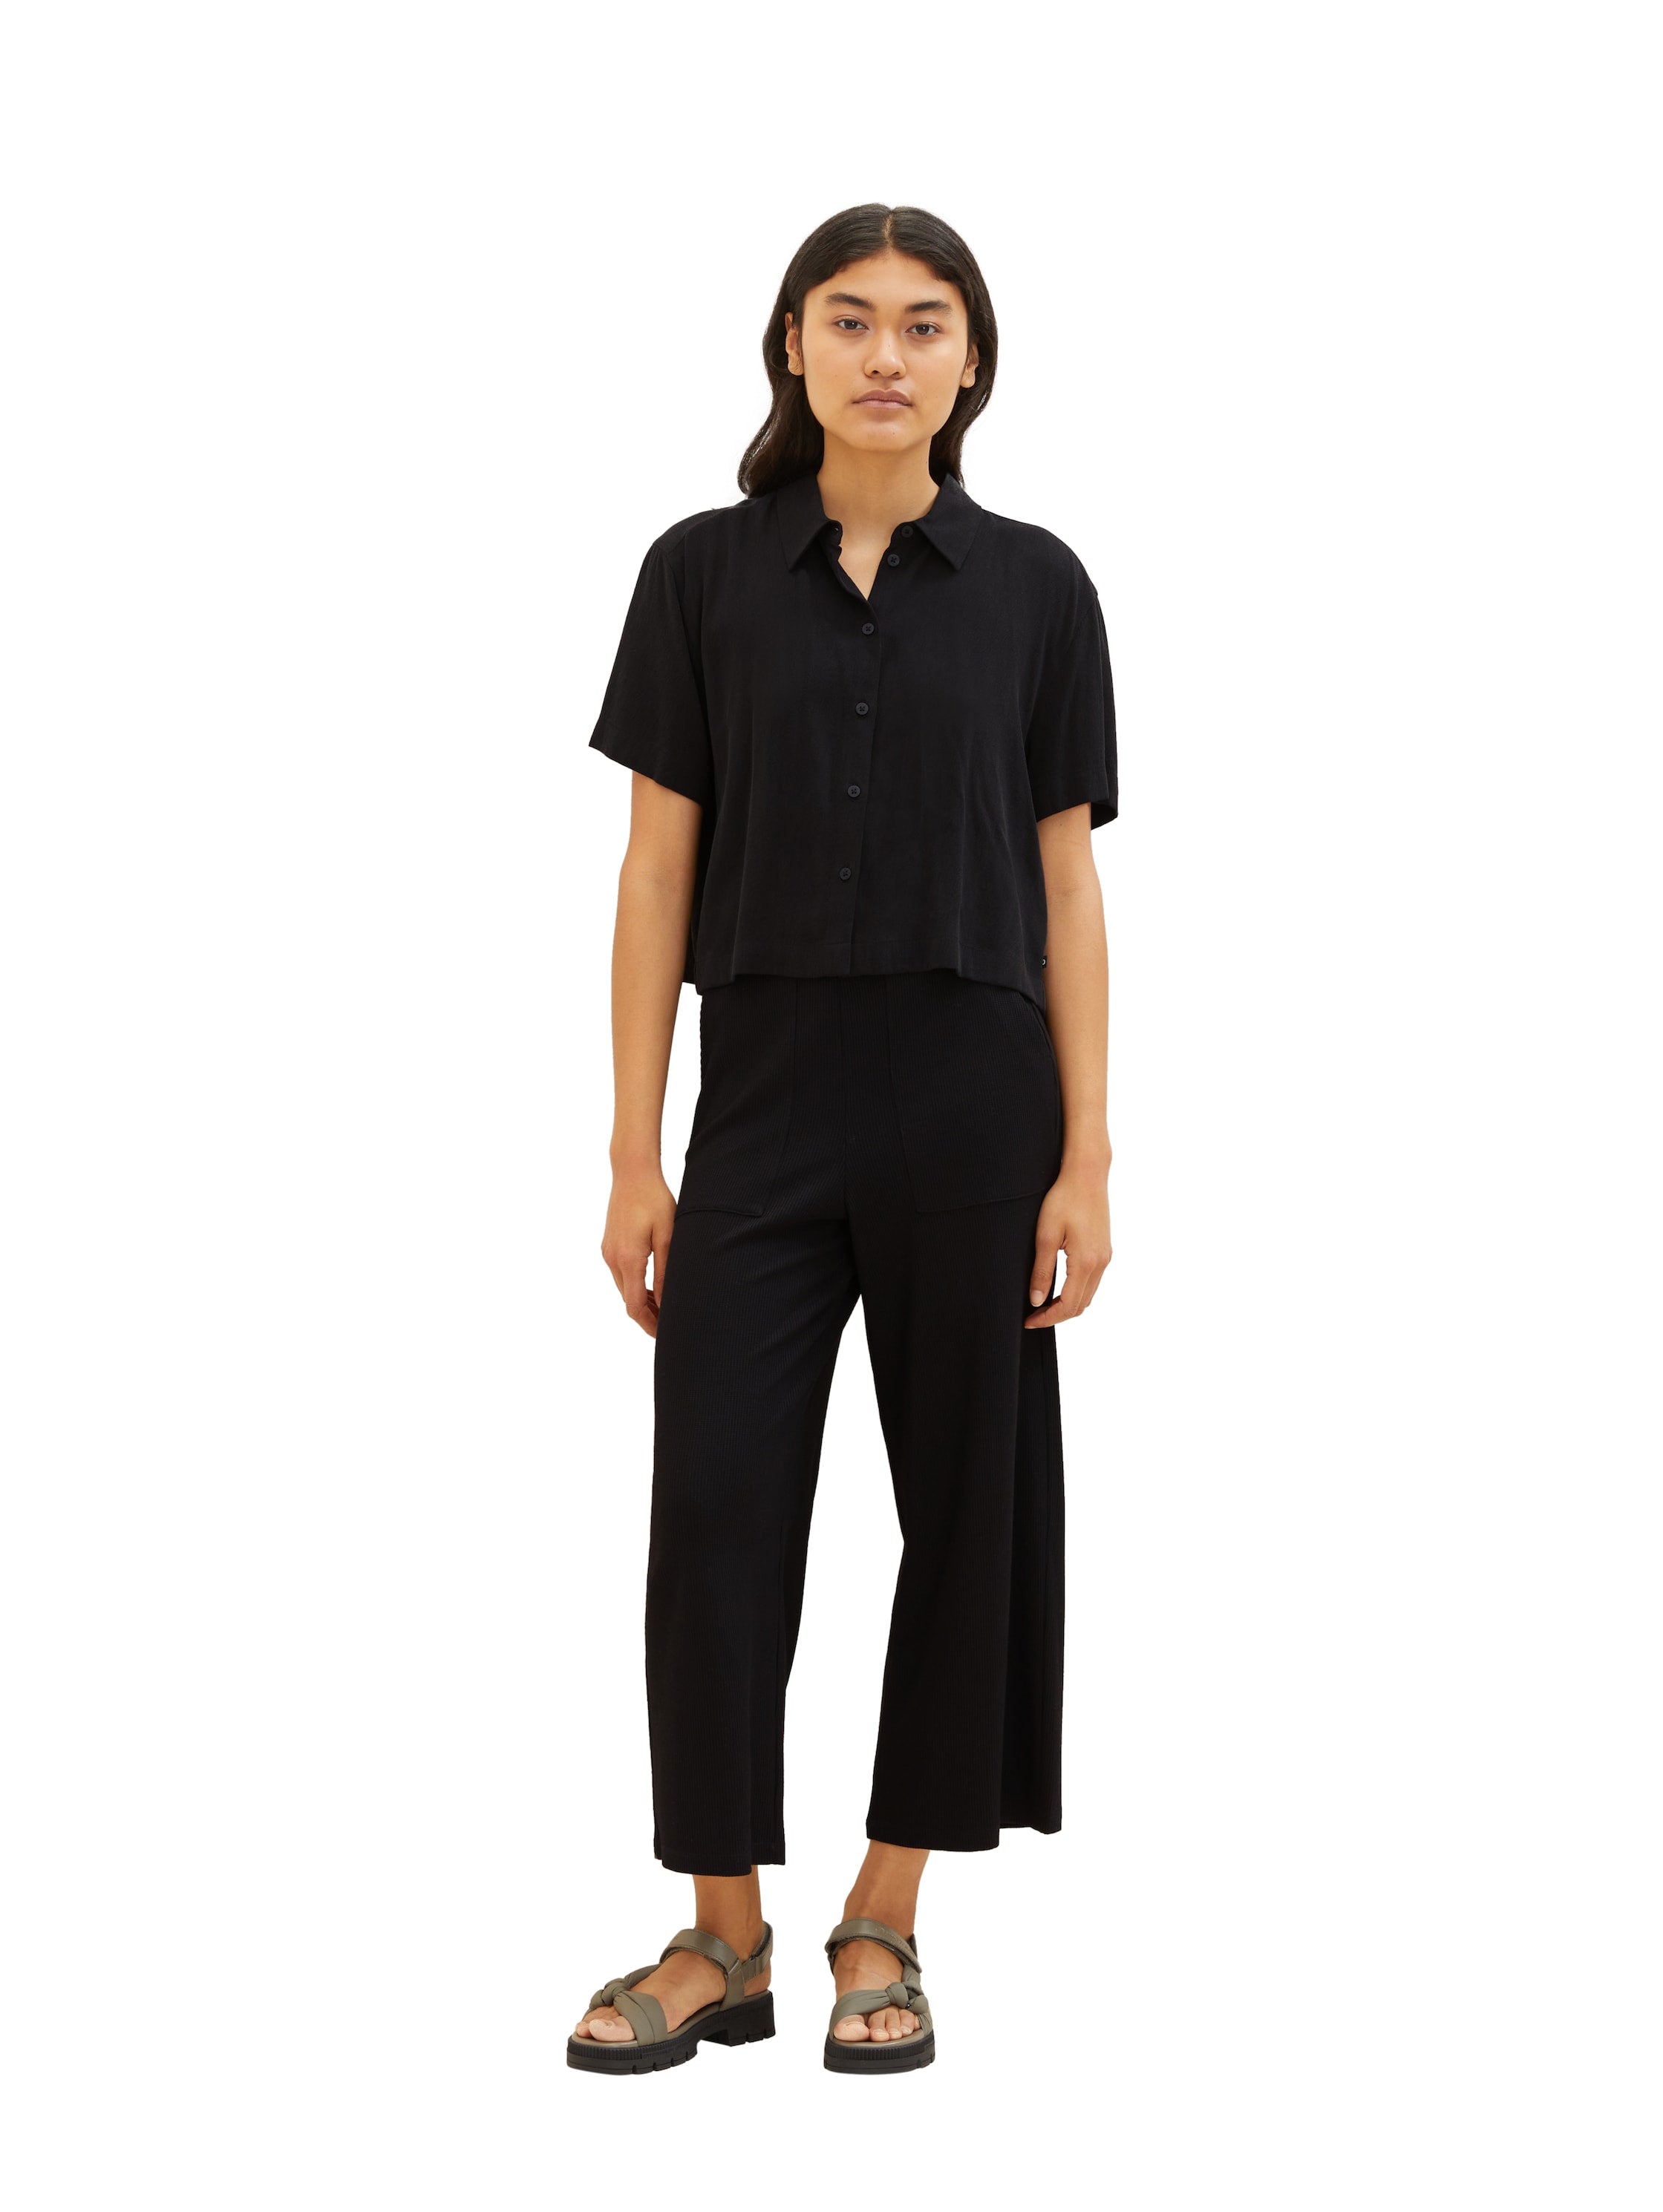 Cropped Slip On Trousers With Pockets_1038220_14482_04